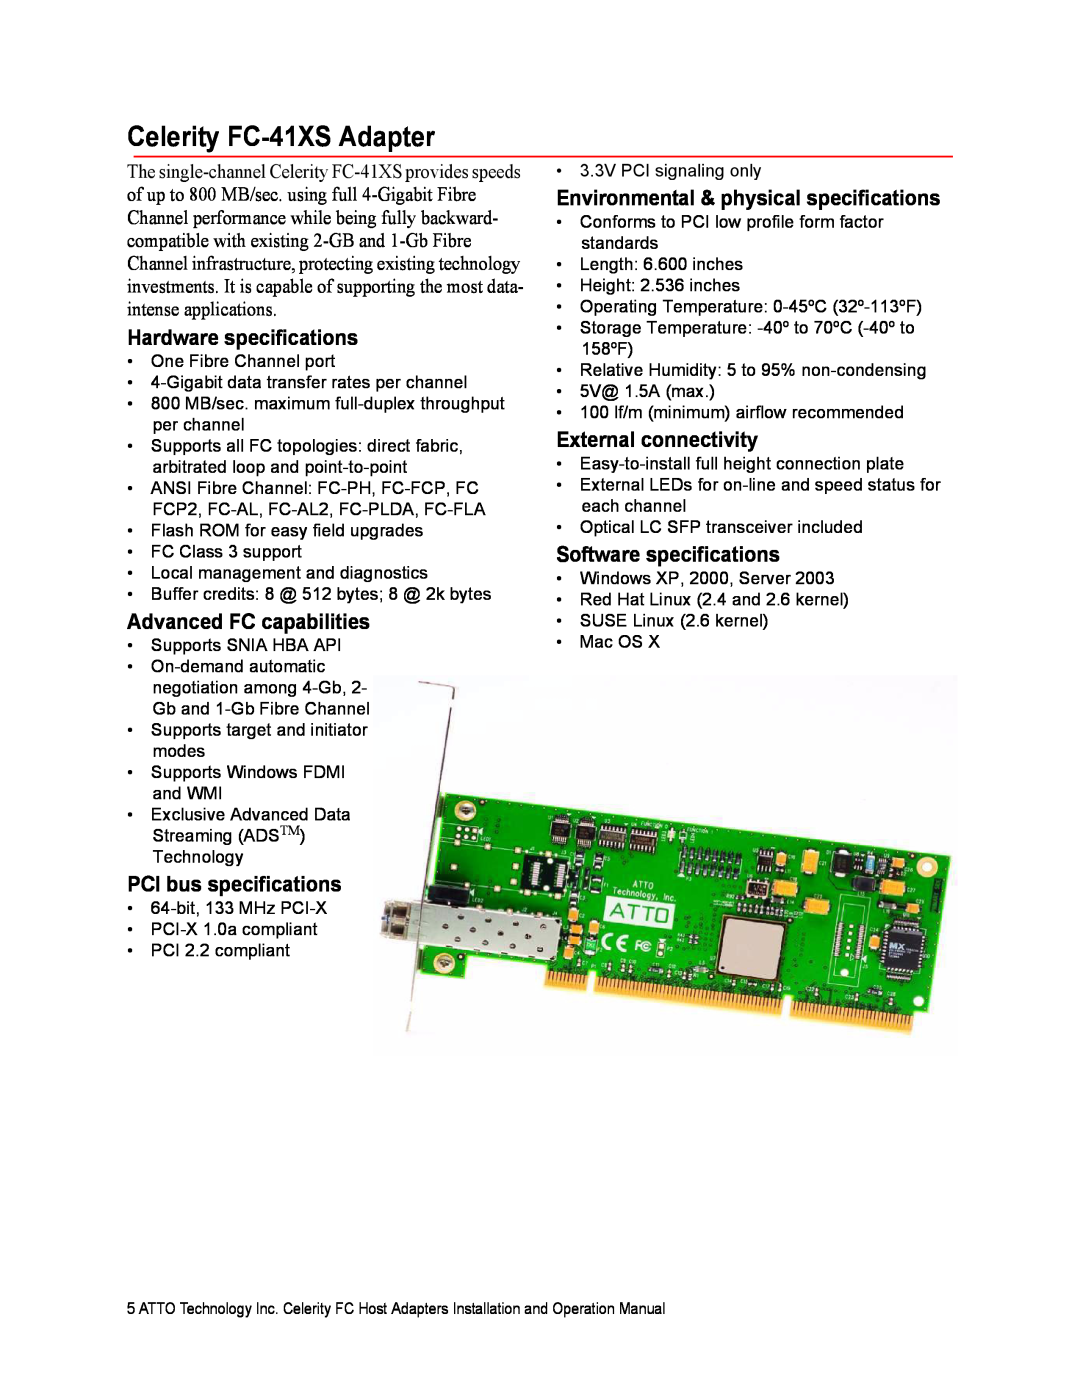 ATTO Technology FC-44ES 4-Gb operation manual Celerity FC-41XS Adapter, Hardware specifications, Advanced FC capabilities 